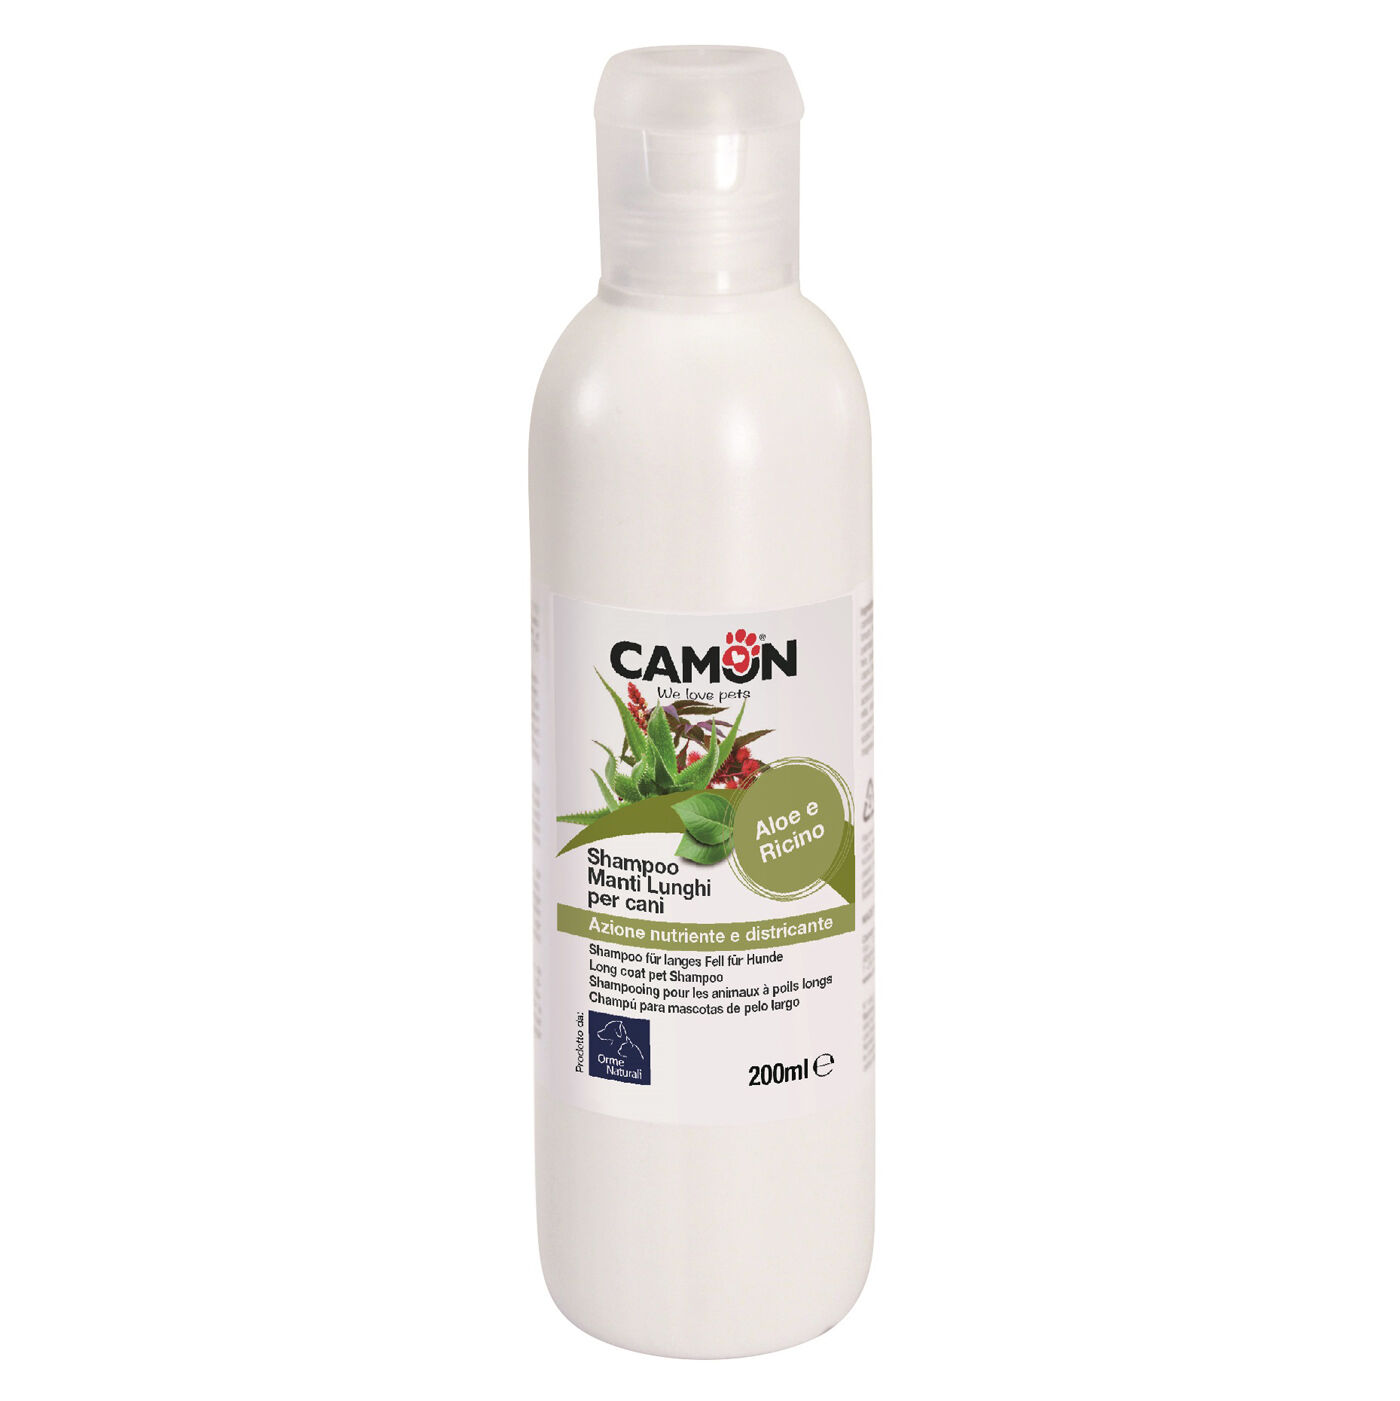 Camon-Shampoo-fuer-langes-Fell-200-ml-online-kaufen-CO-G805